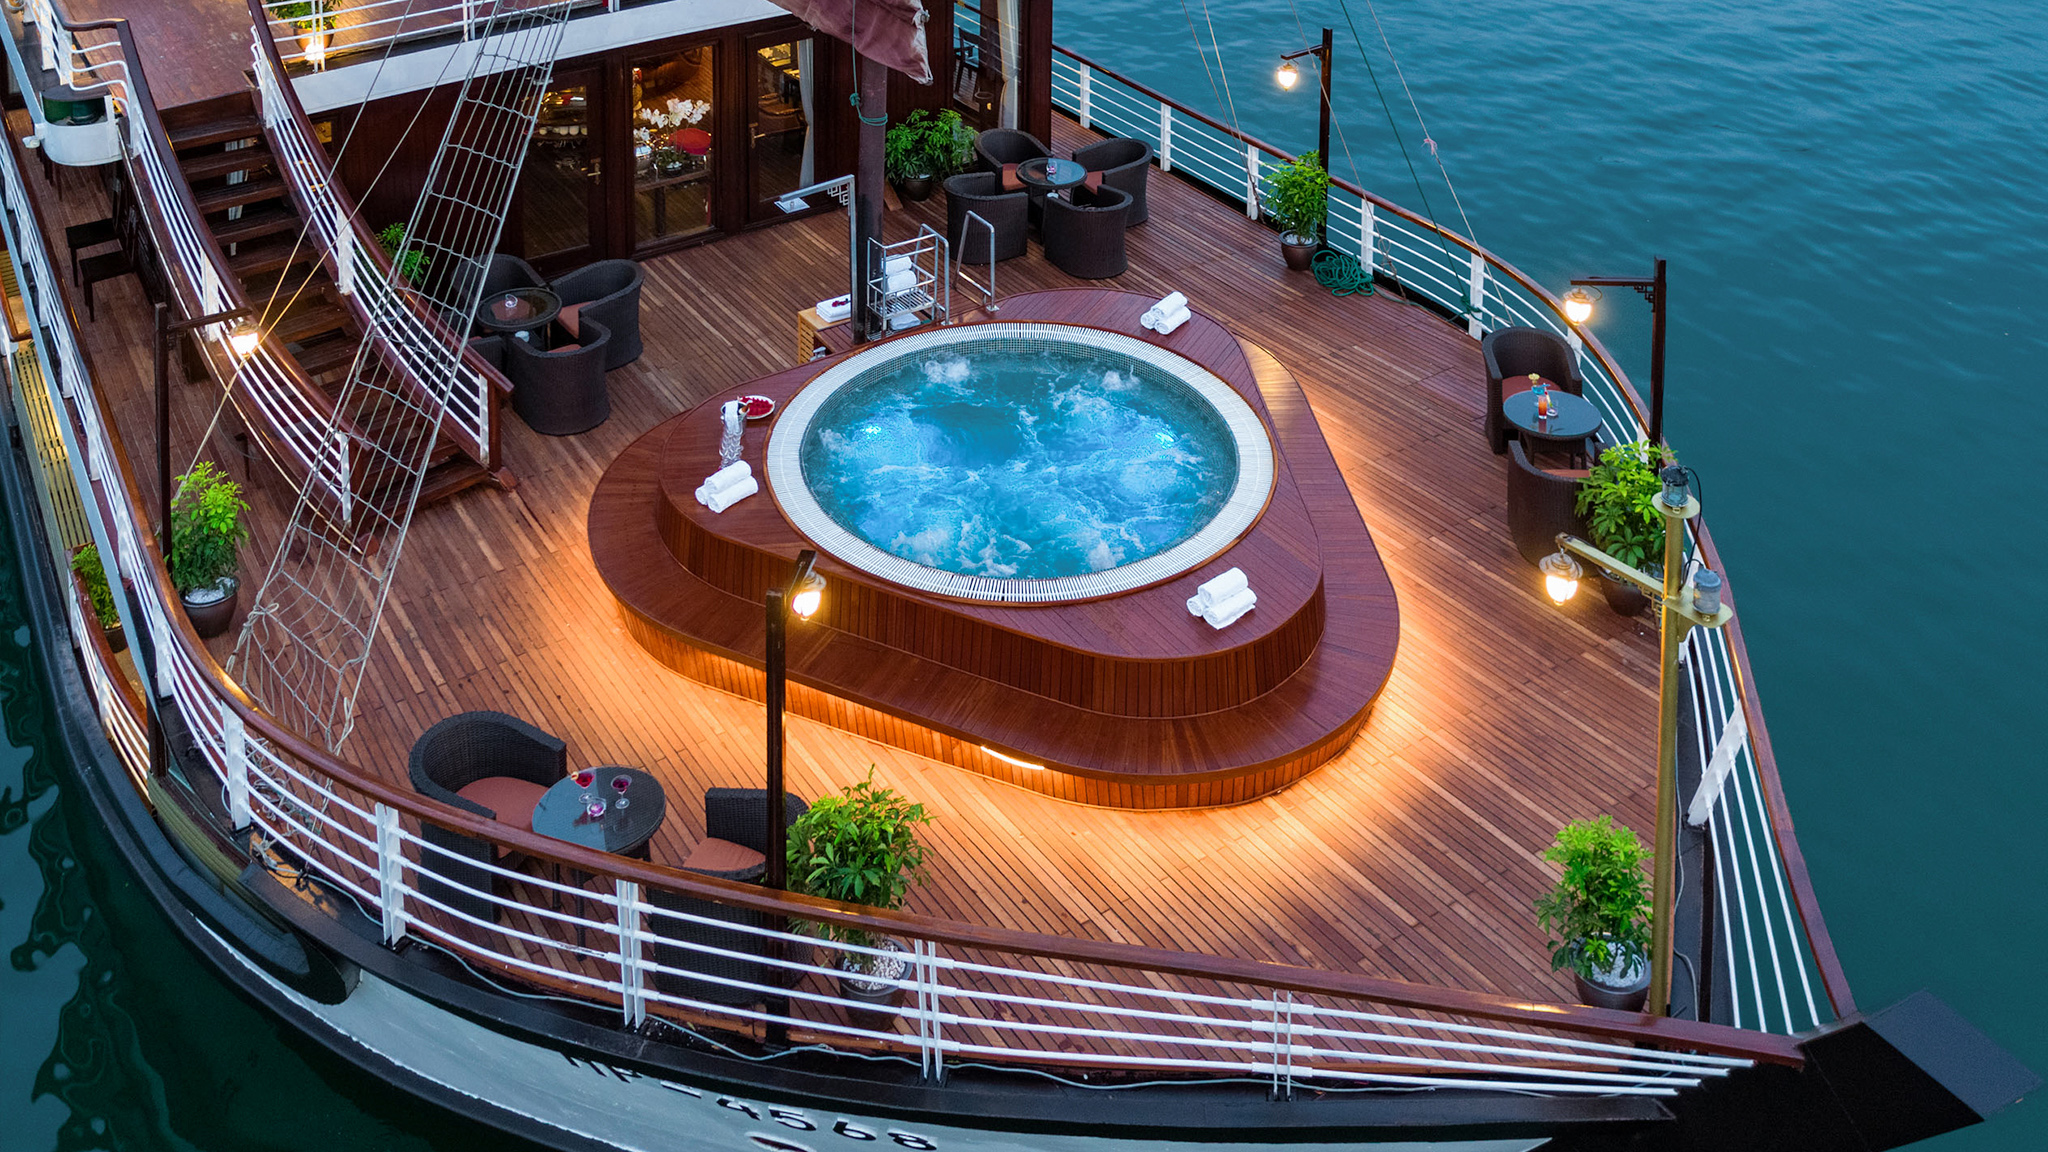 Unwind in the luxurious outdoor Jacuzzi